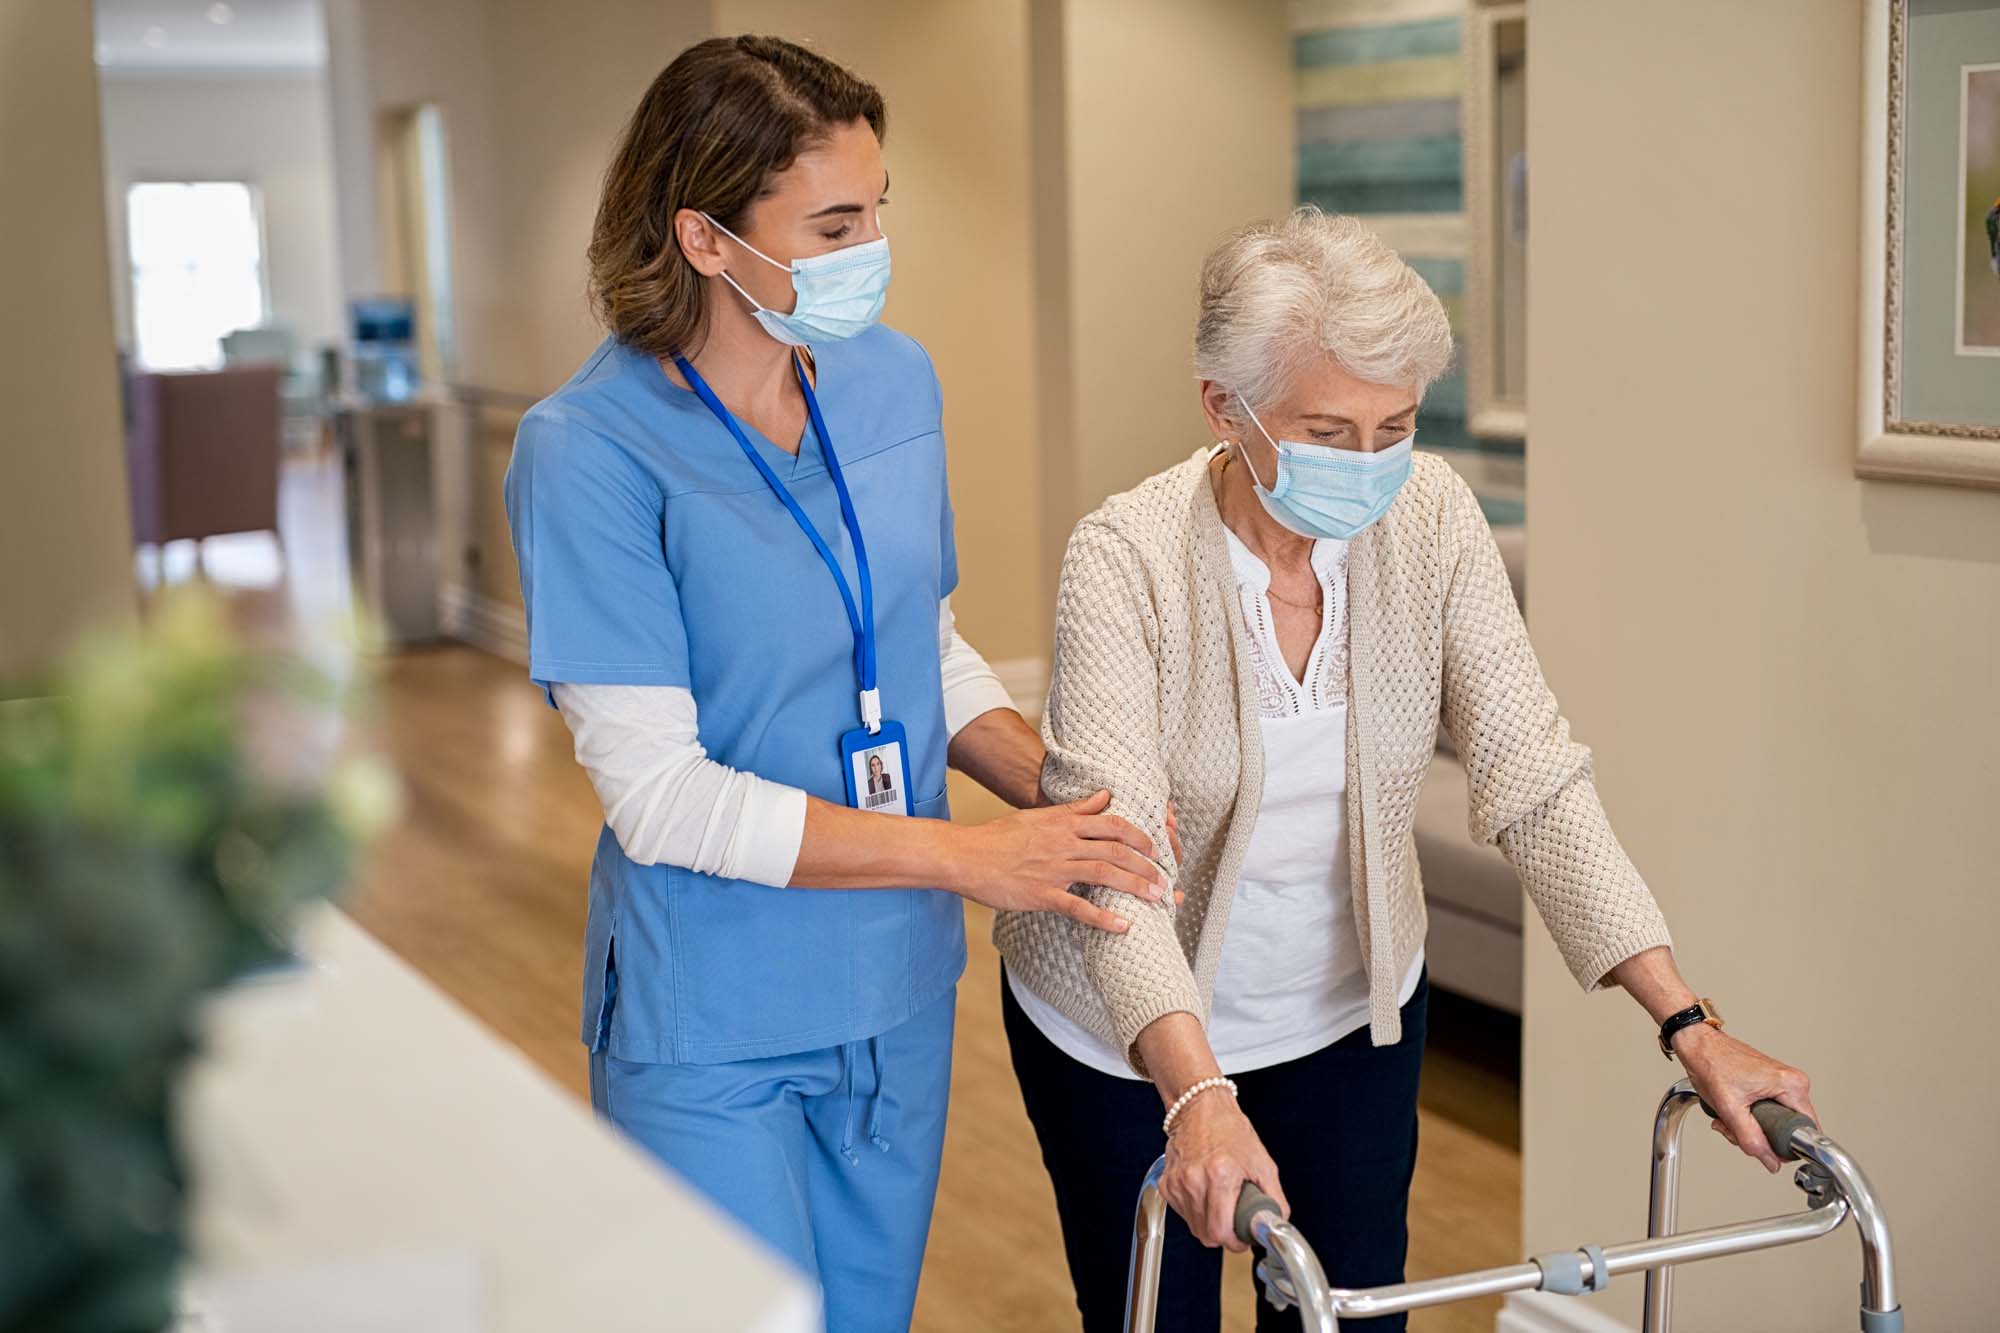 Nurse with face mask helping senior woman to walk around the nursing home with walker.